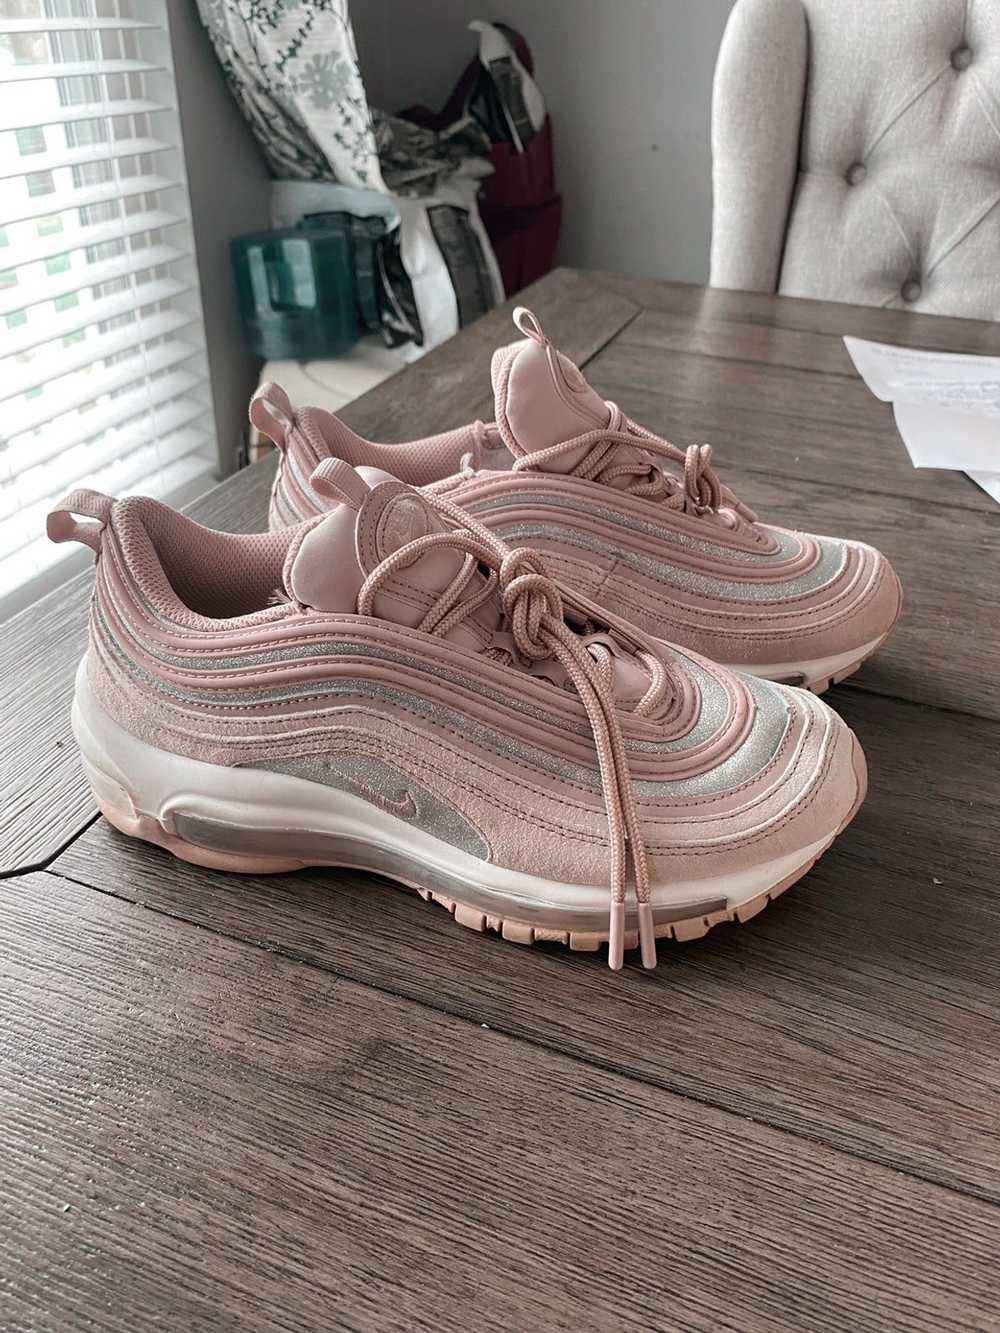 Nike Wmns Air Max 97 ‘Particle Rose’ - image 3